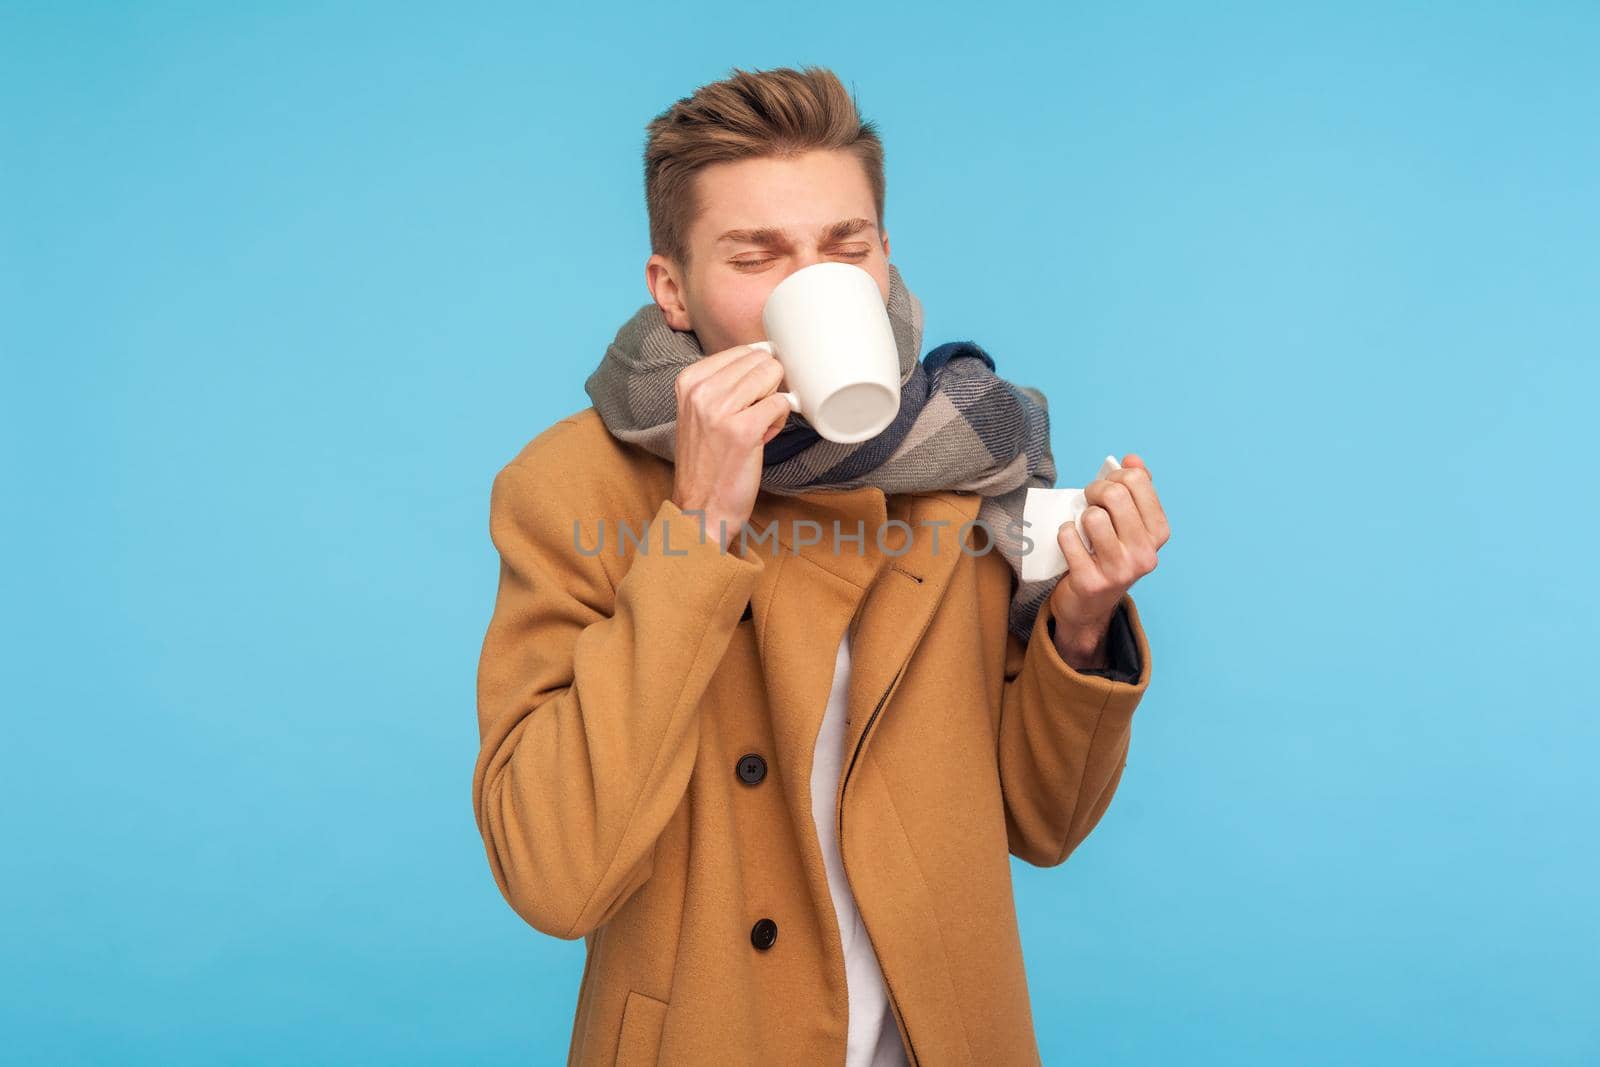 Flu treatment and self-care. Sick man in autumn coat and scarf drinking medicine with hot tea, holding tissue for runny nose, suffering fever, headache. indoor studio shot isolated on blue background